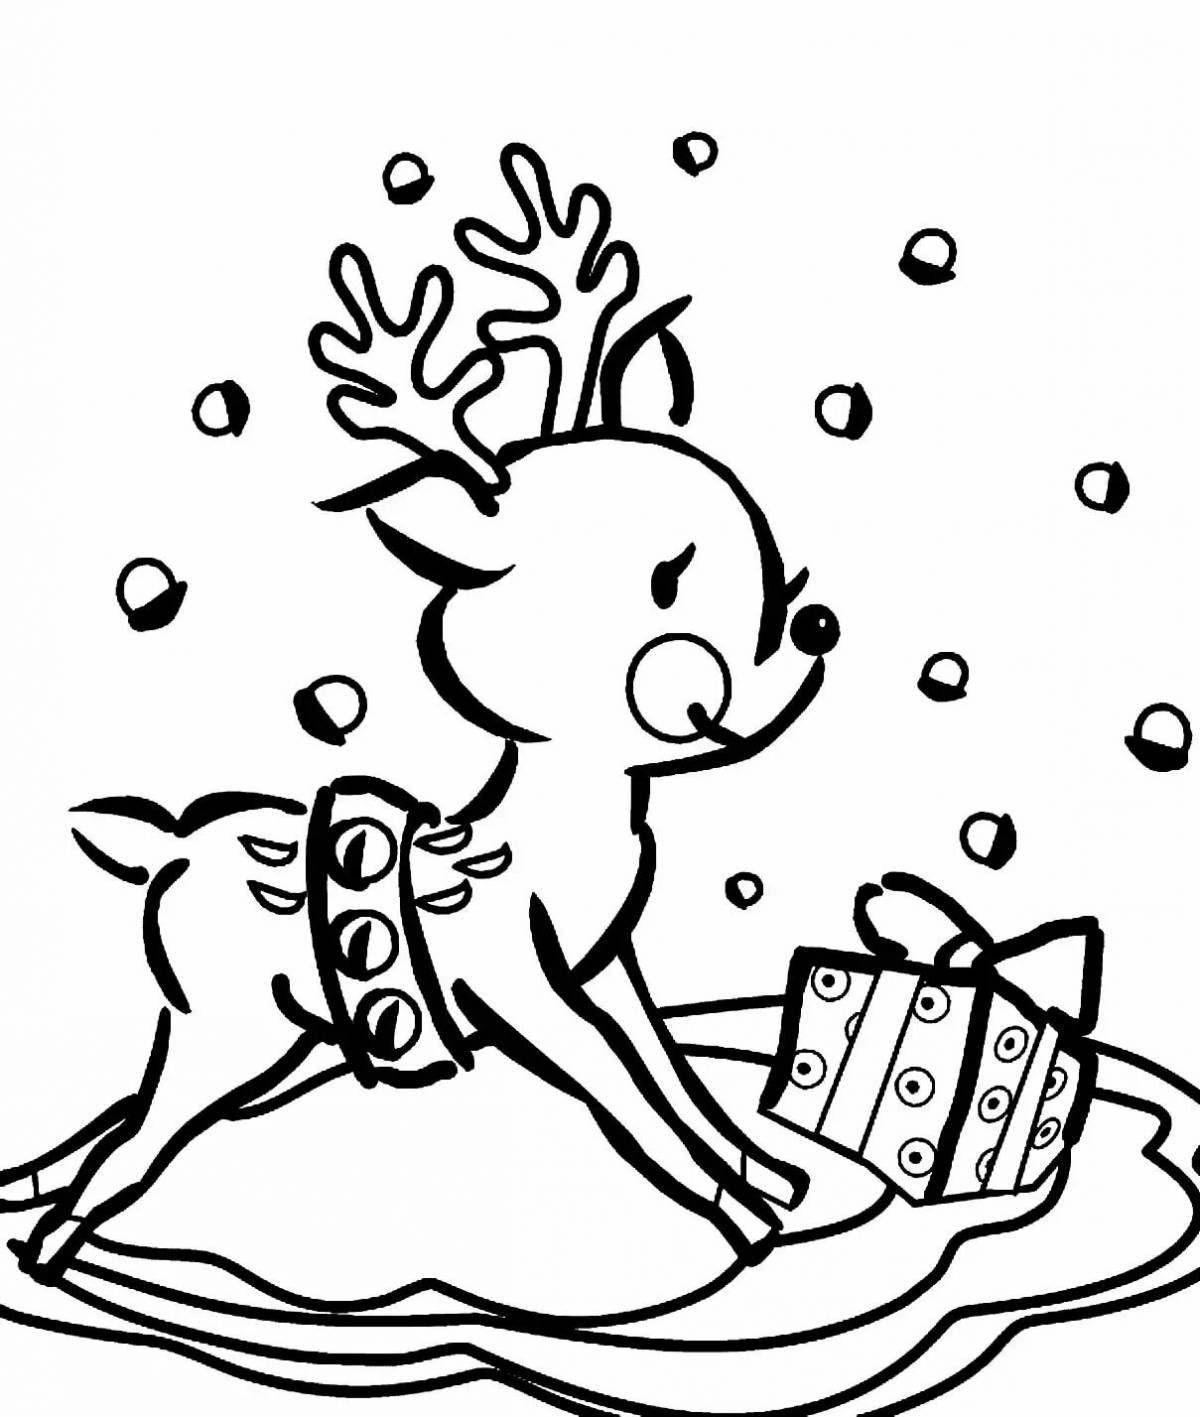 Exquisite Christmas deer coloring book for kids